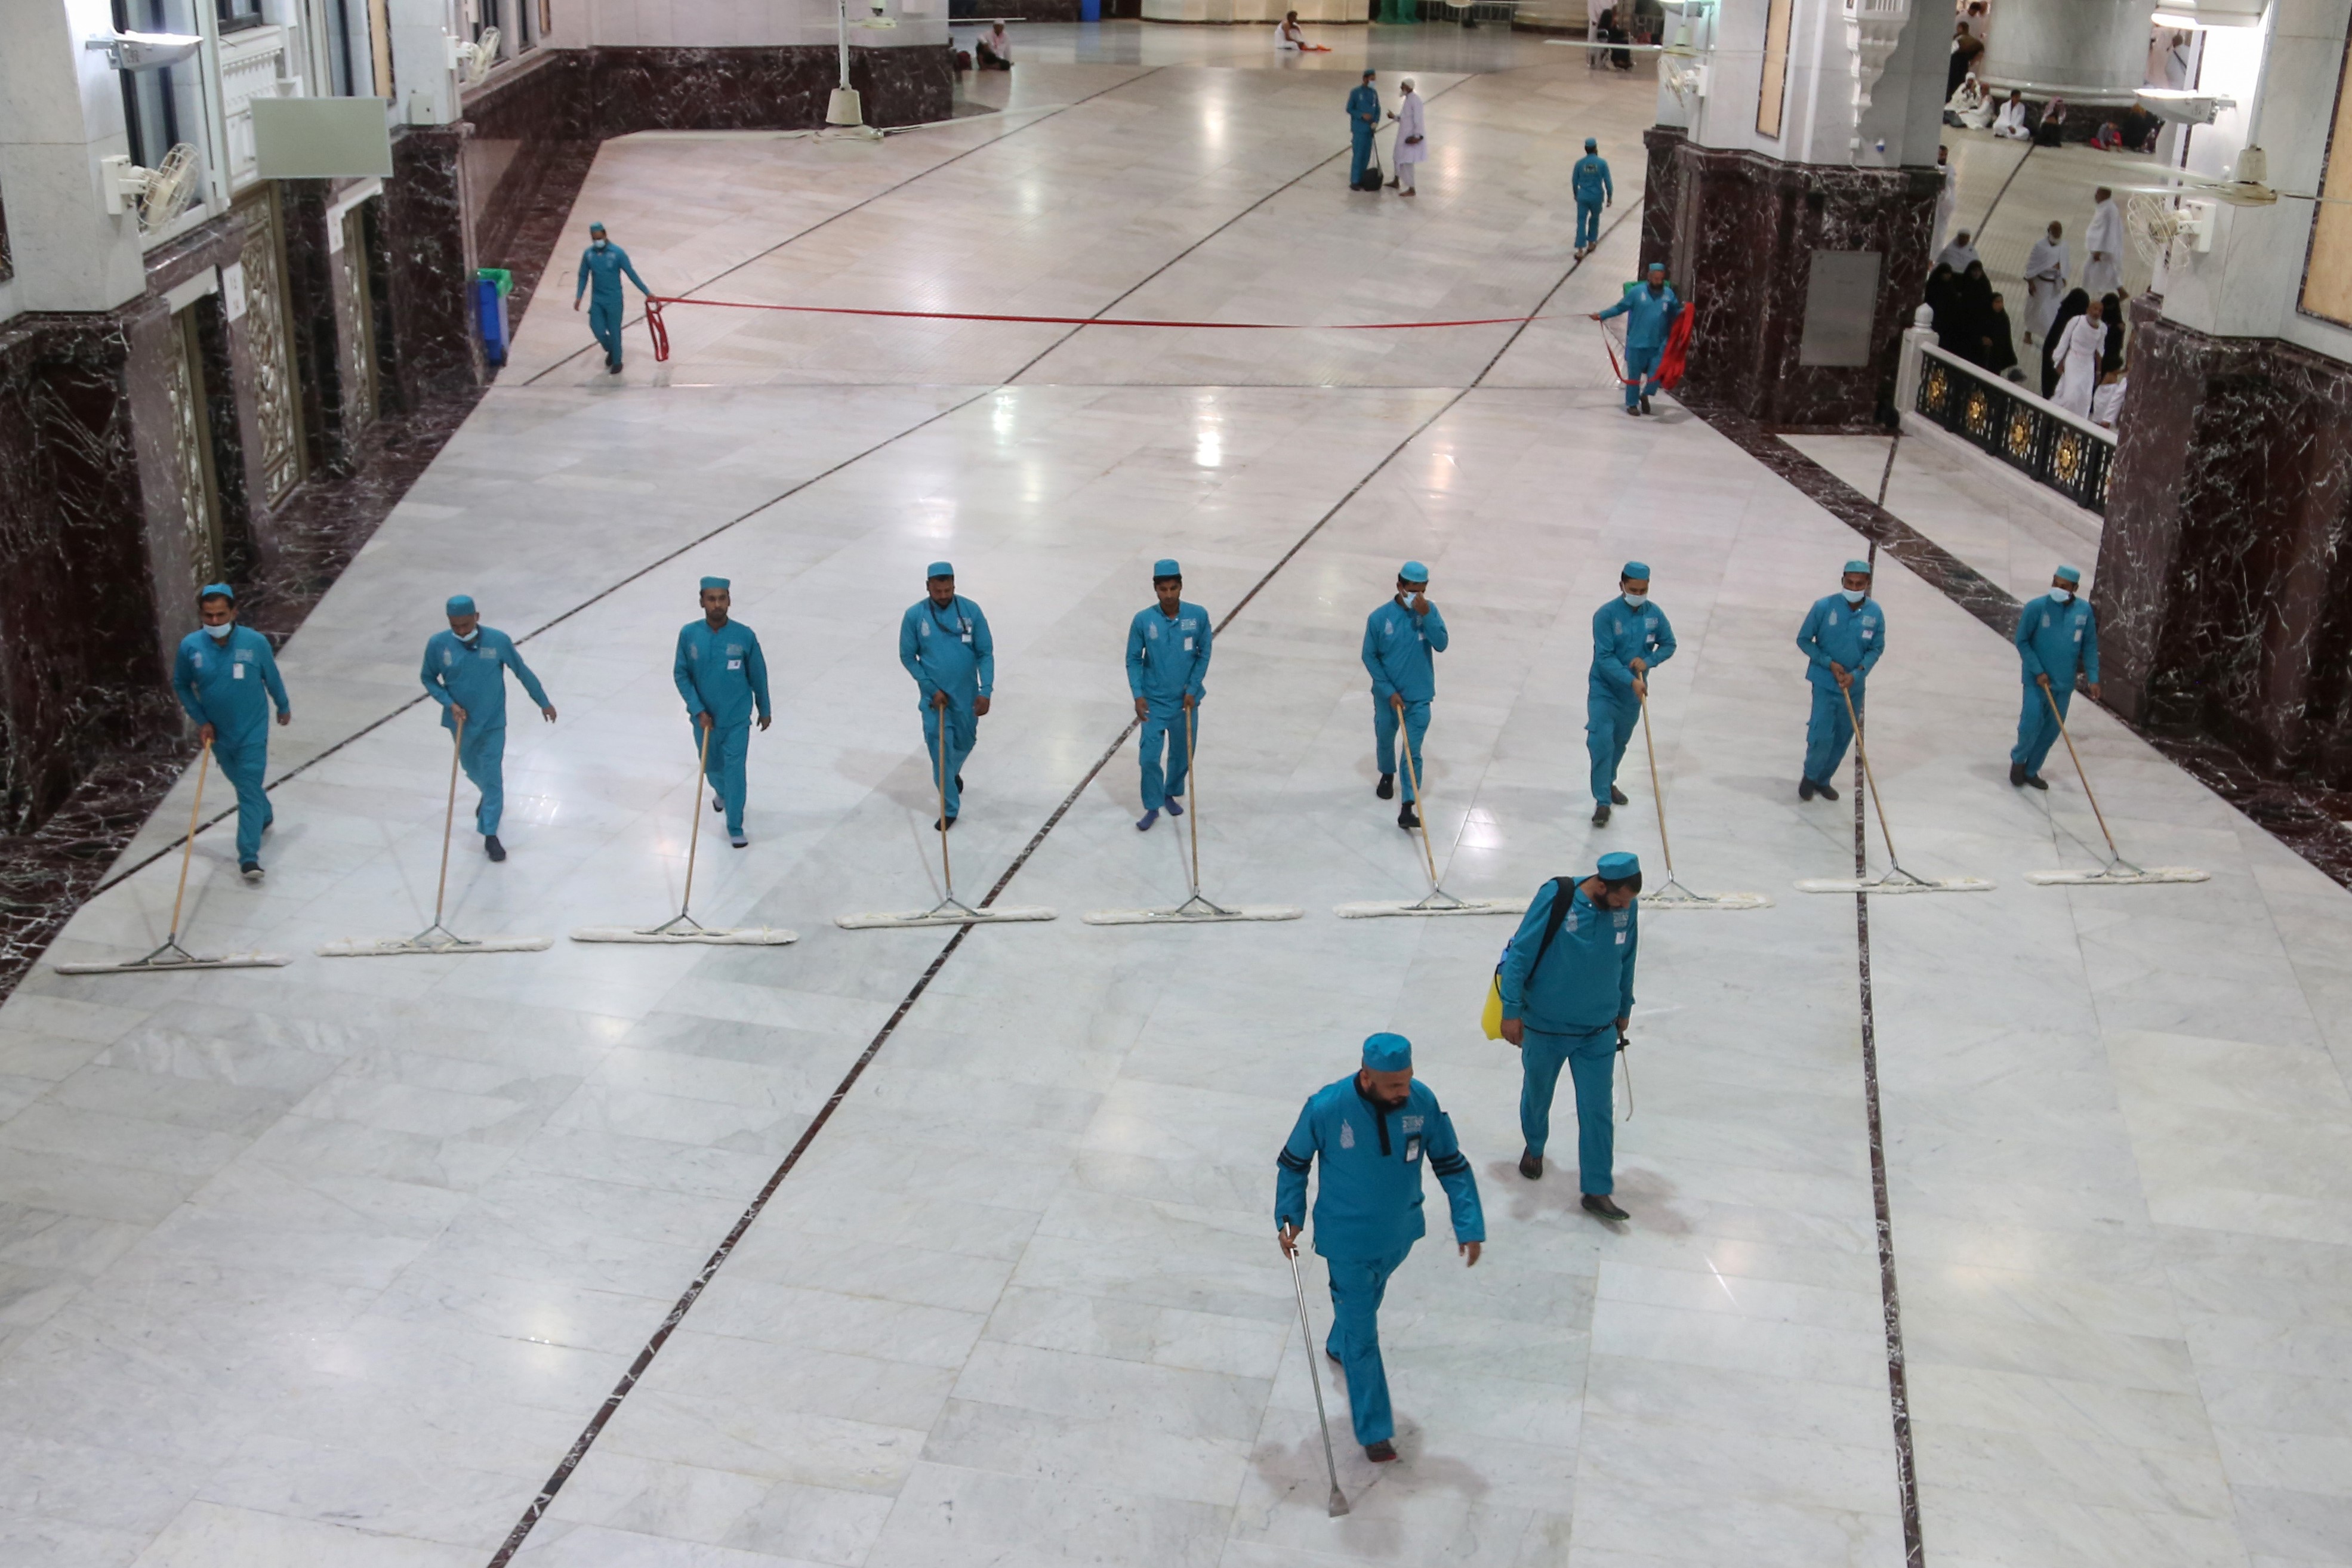 Cleaners wear protective face masks, following the outbreak of the coronavirus, as they swipe the floor at the Grand mosque in the holy city of Mecca, Saudi Arabia March 3, 2020.